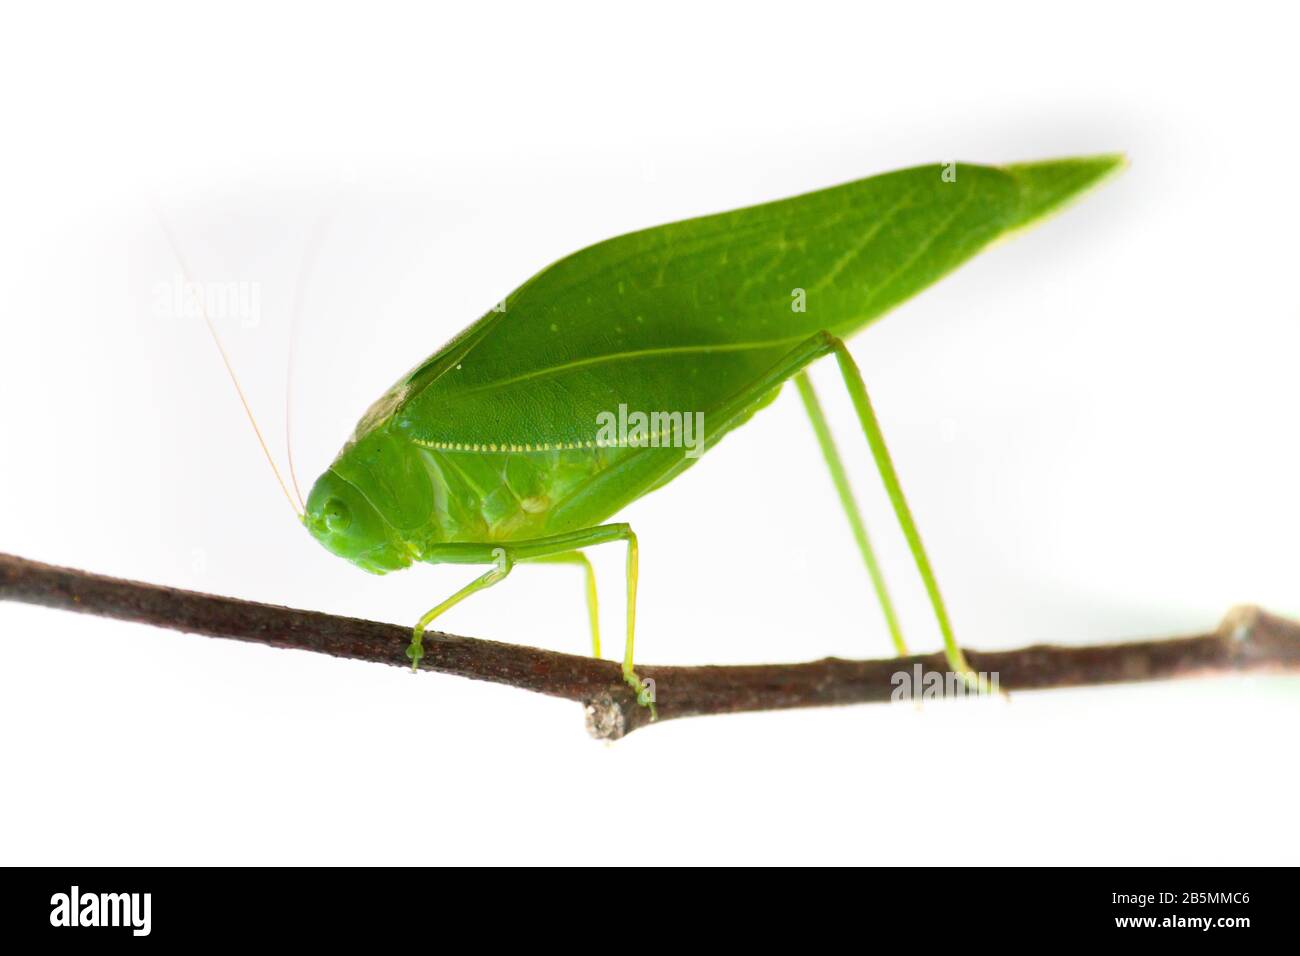 Green bush cricket, katydid or long-horned grasshopper (insect family Tettigoniidae) attached to a tree branch wooden stick macro closeup photo isolat Stock Photo